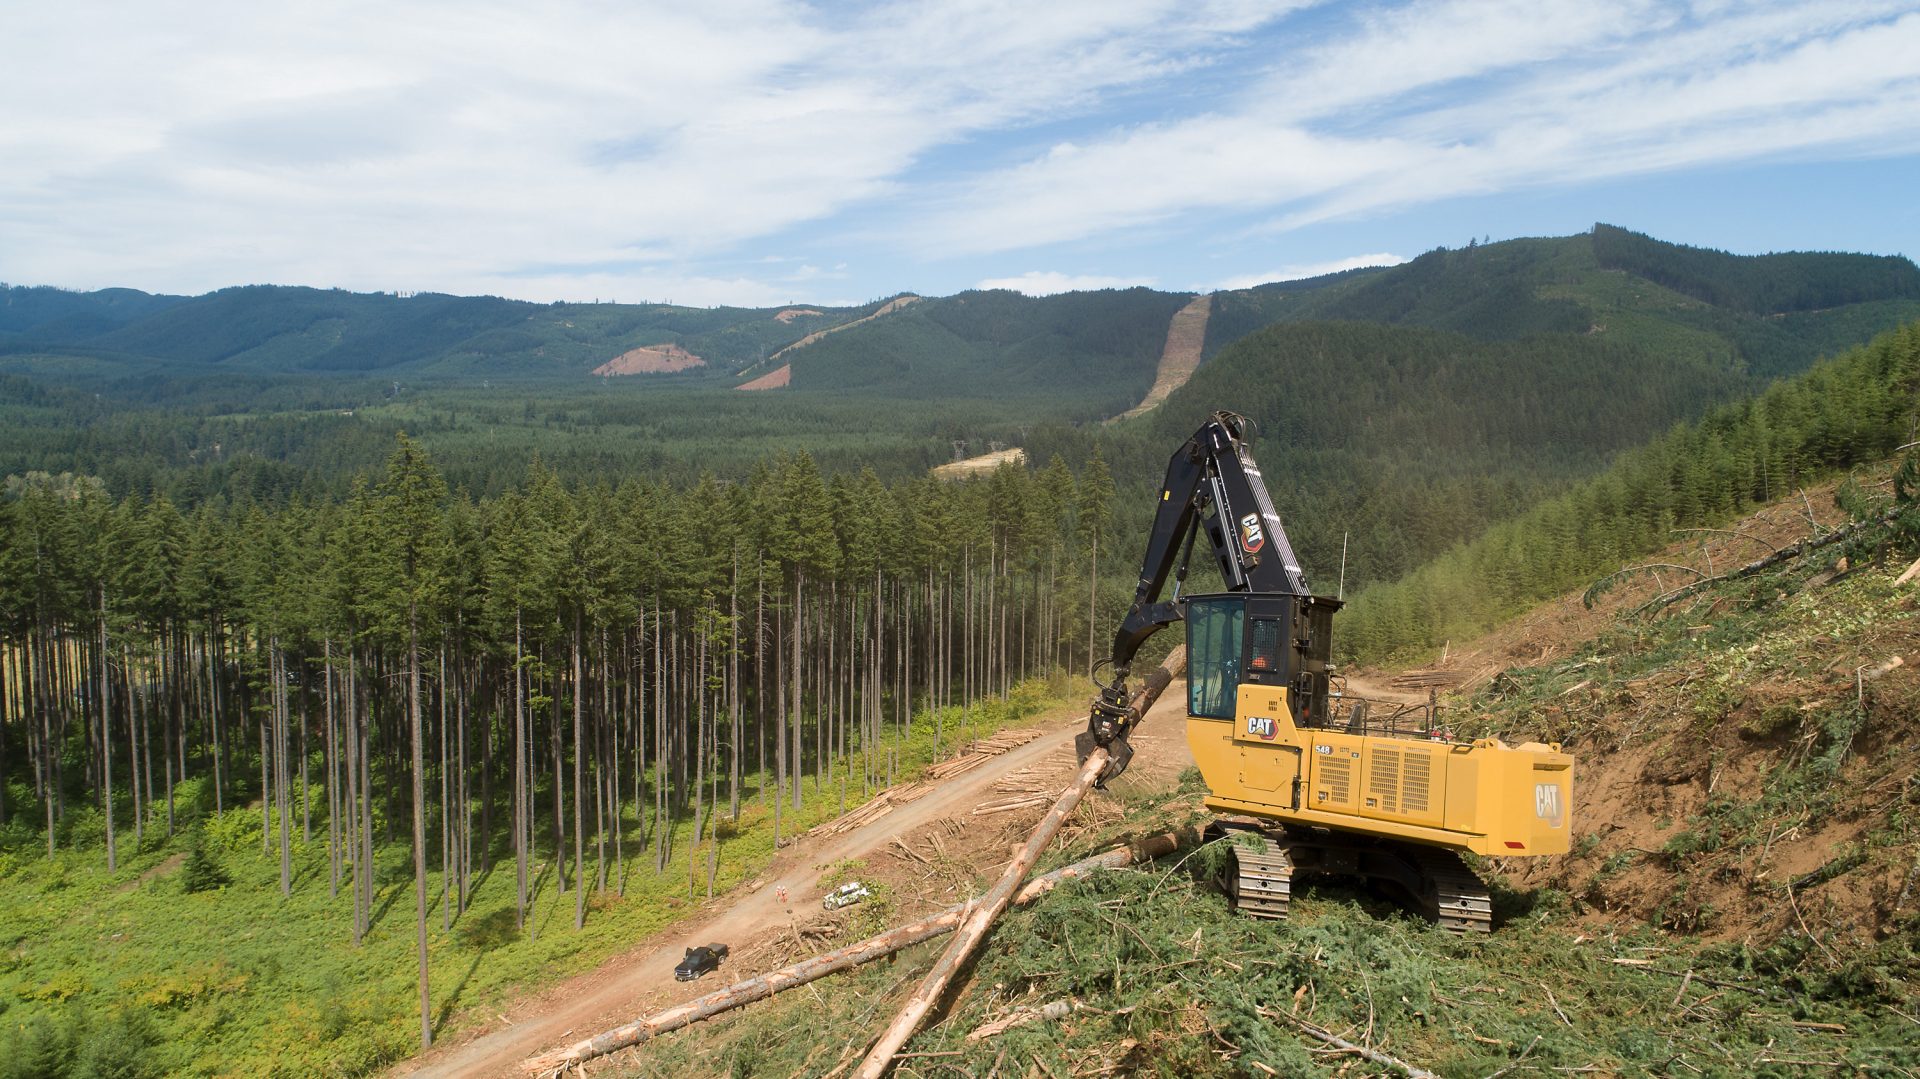 The Cat 548 forestry machine at work